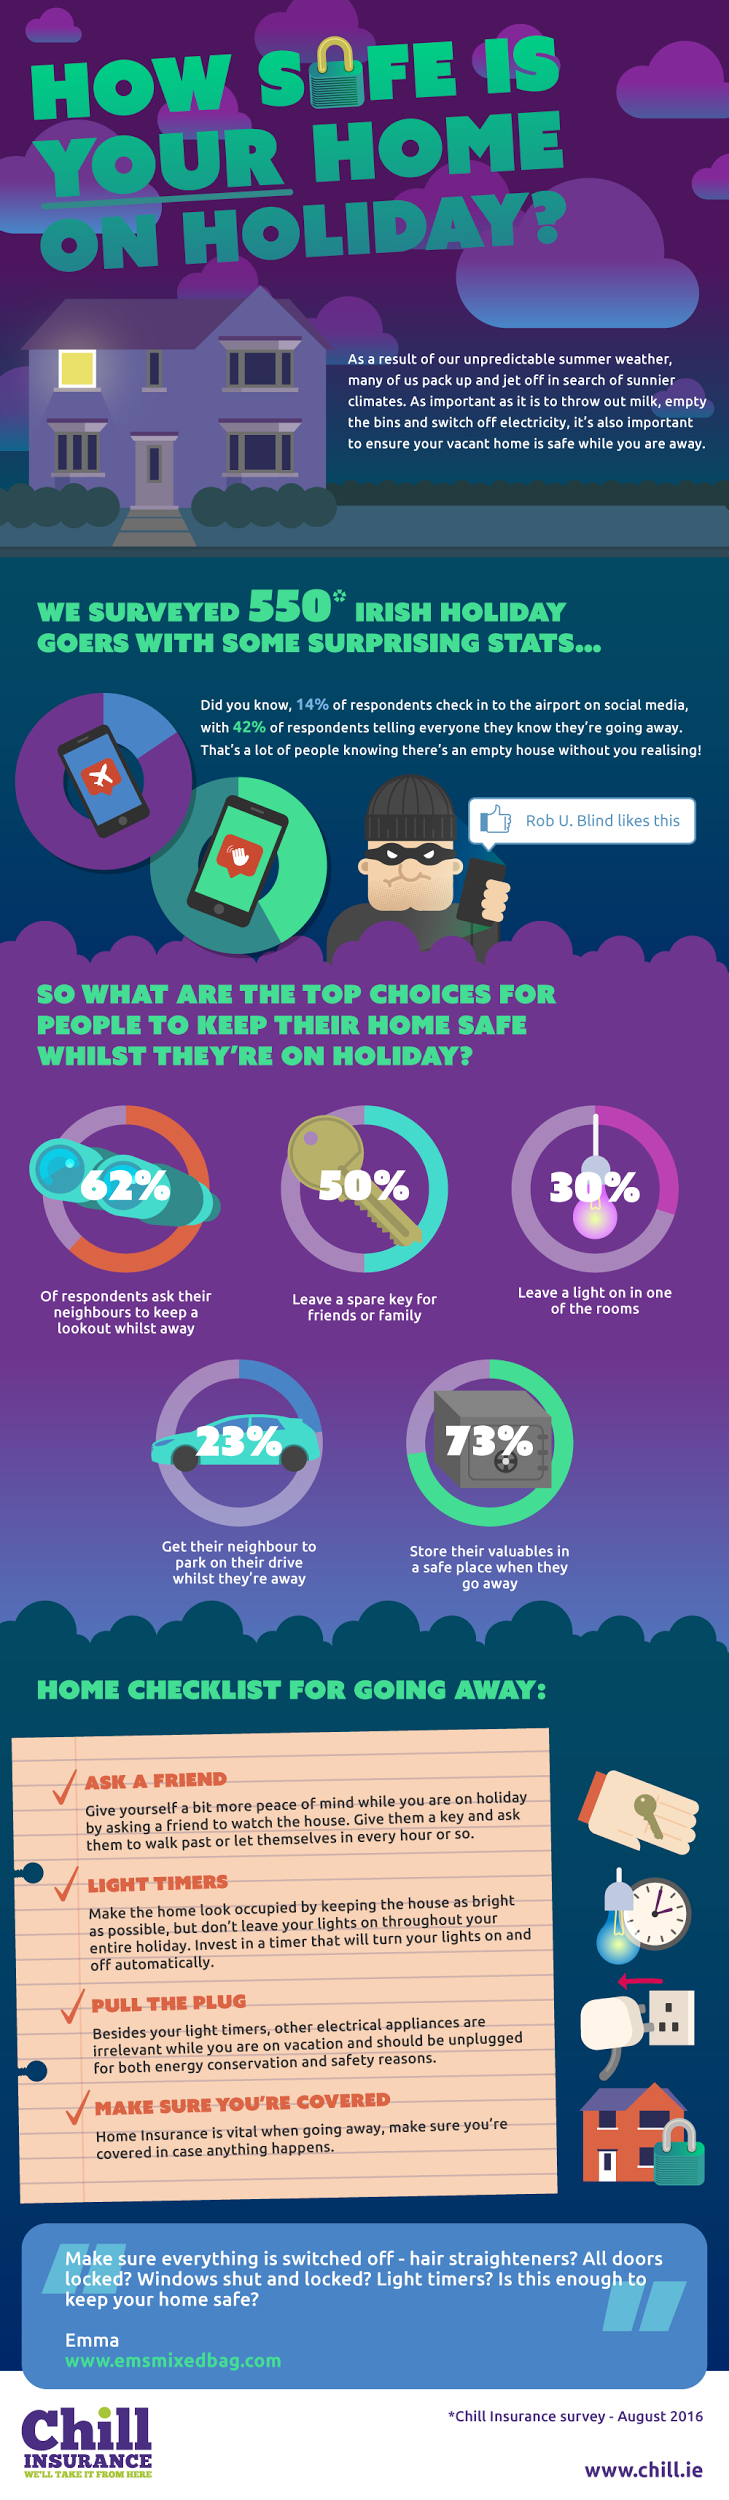 home-safety-infographic